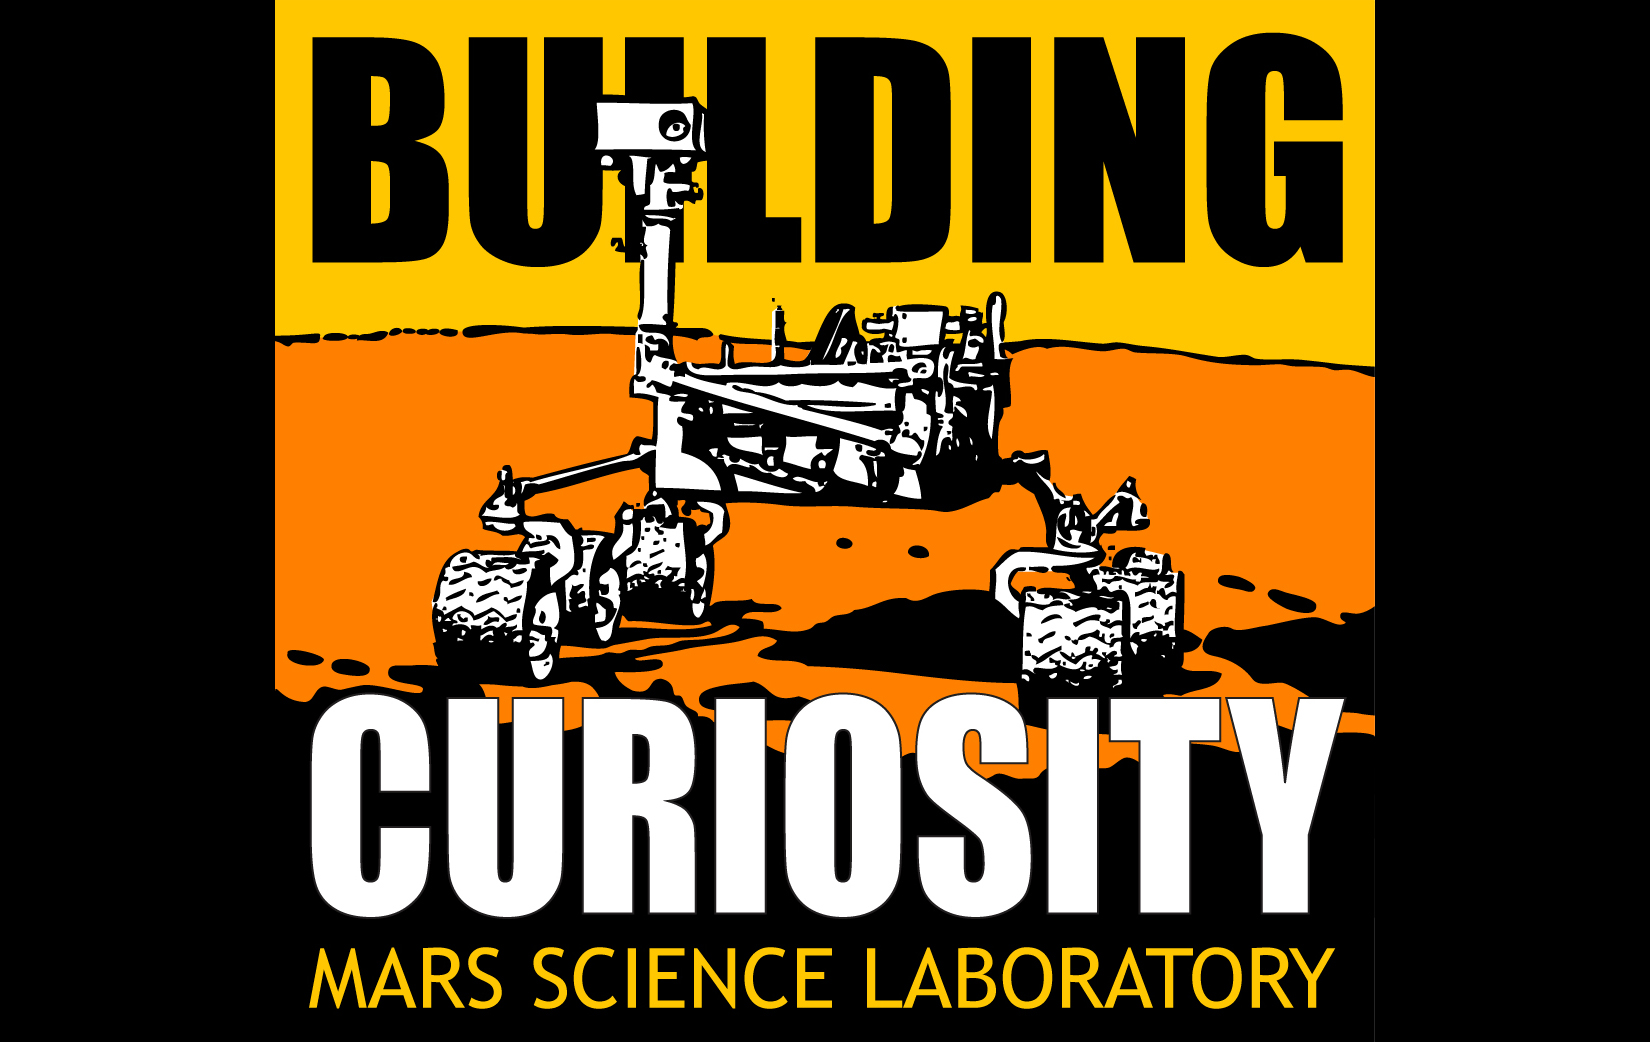 View video of building the Curiosity rover.